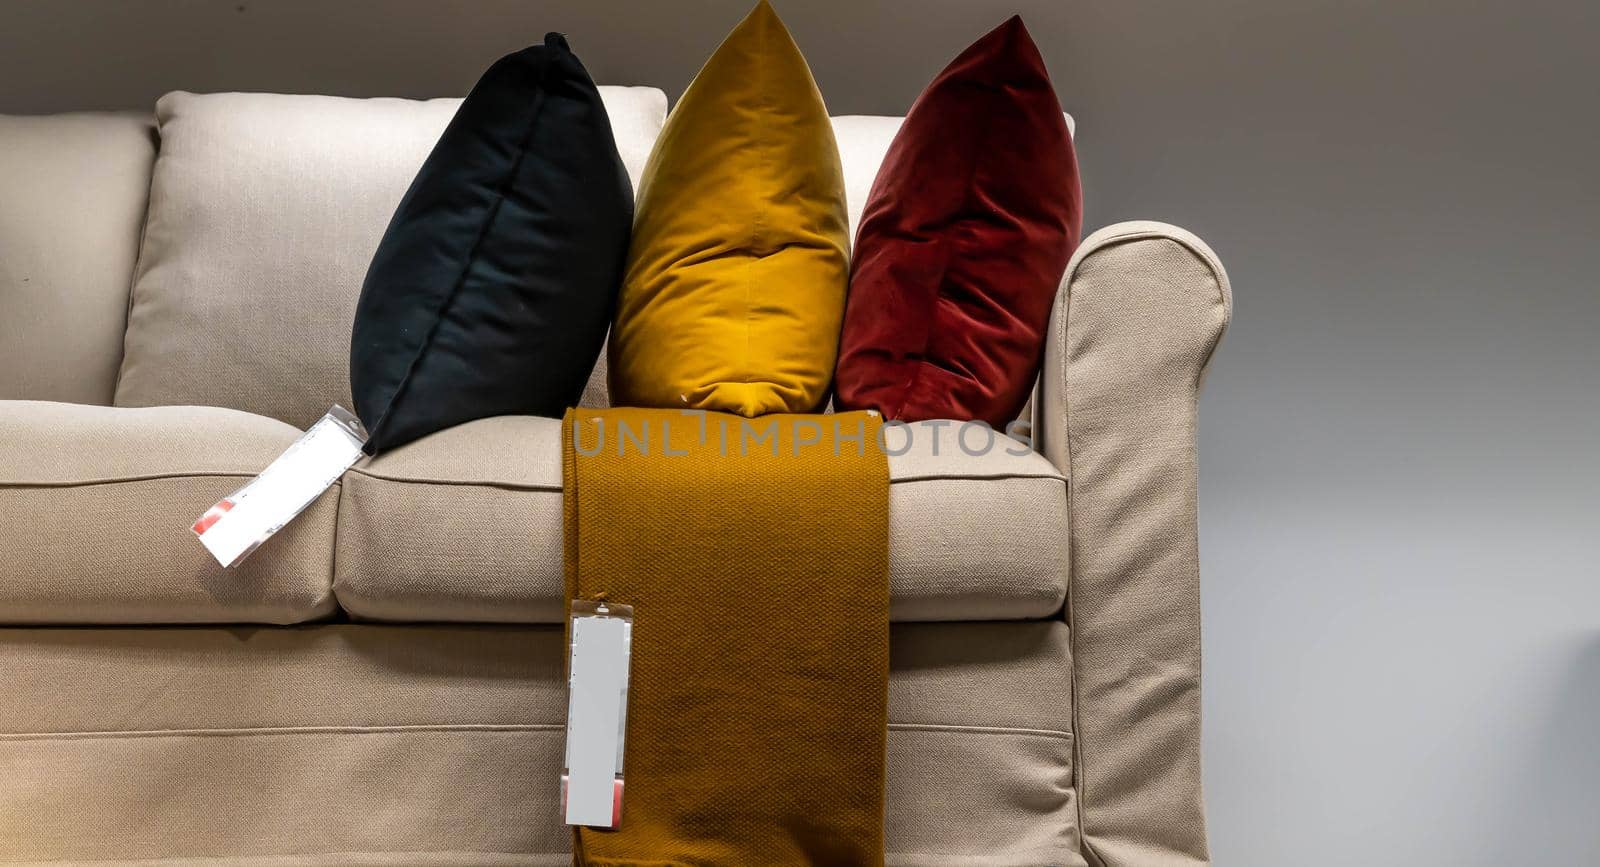 Brown sofa with colorful pillows on sale from a store